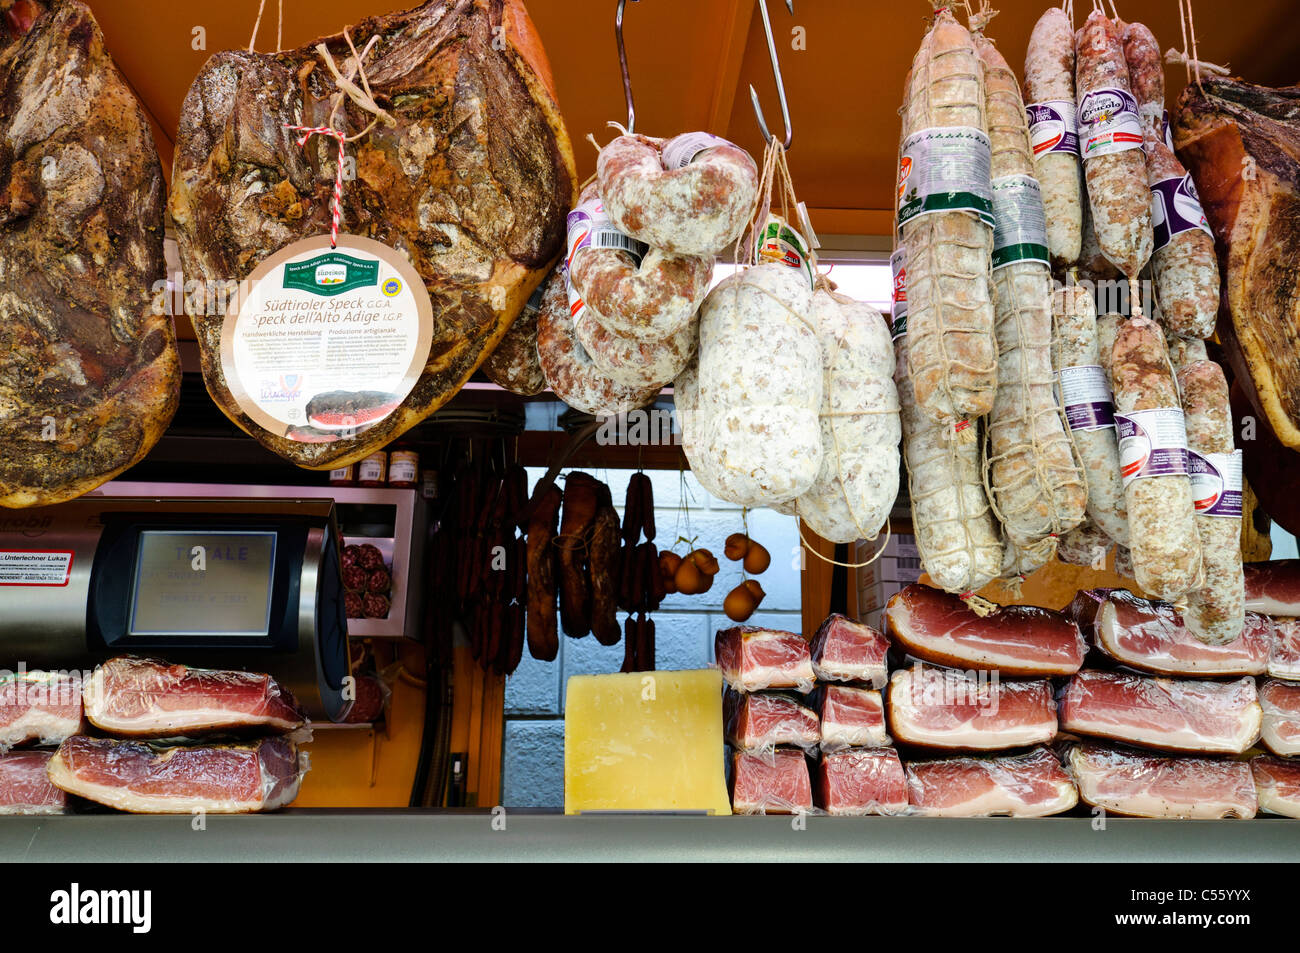 stock - Speck photography and meat images hi-res italian Alamy